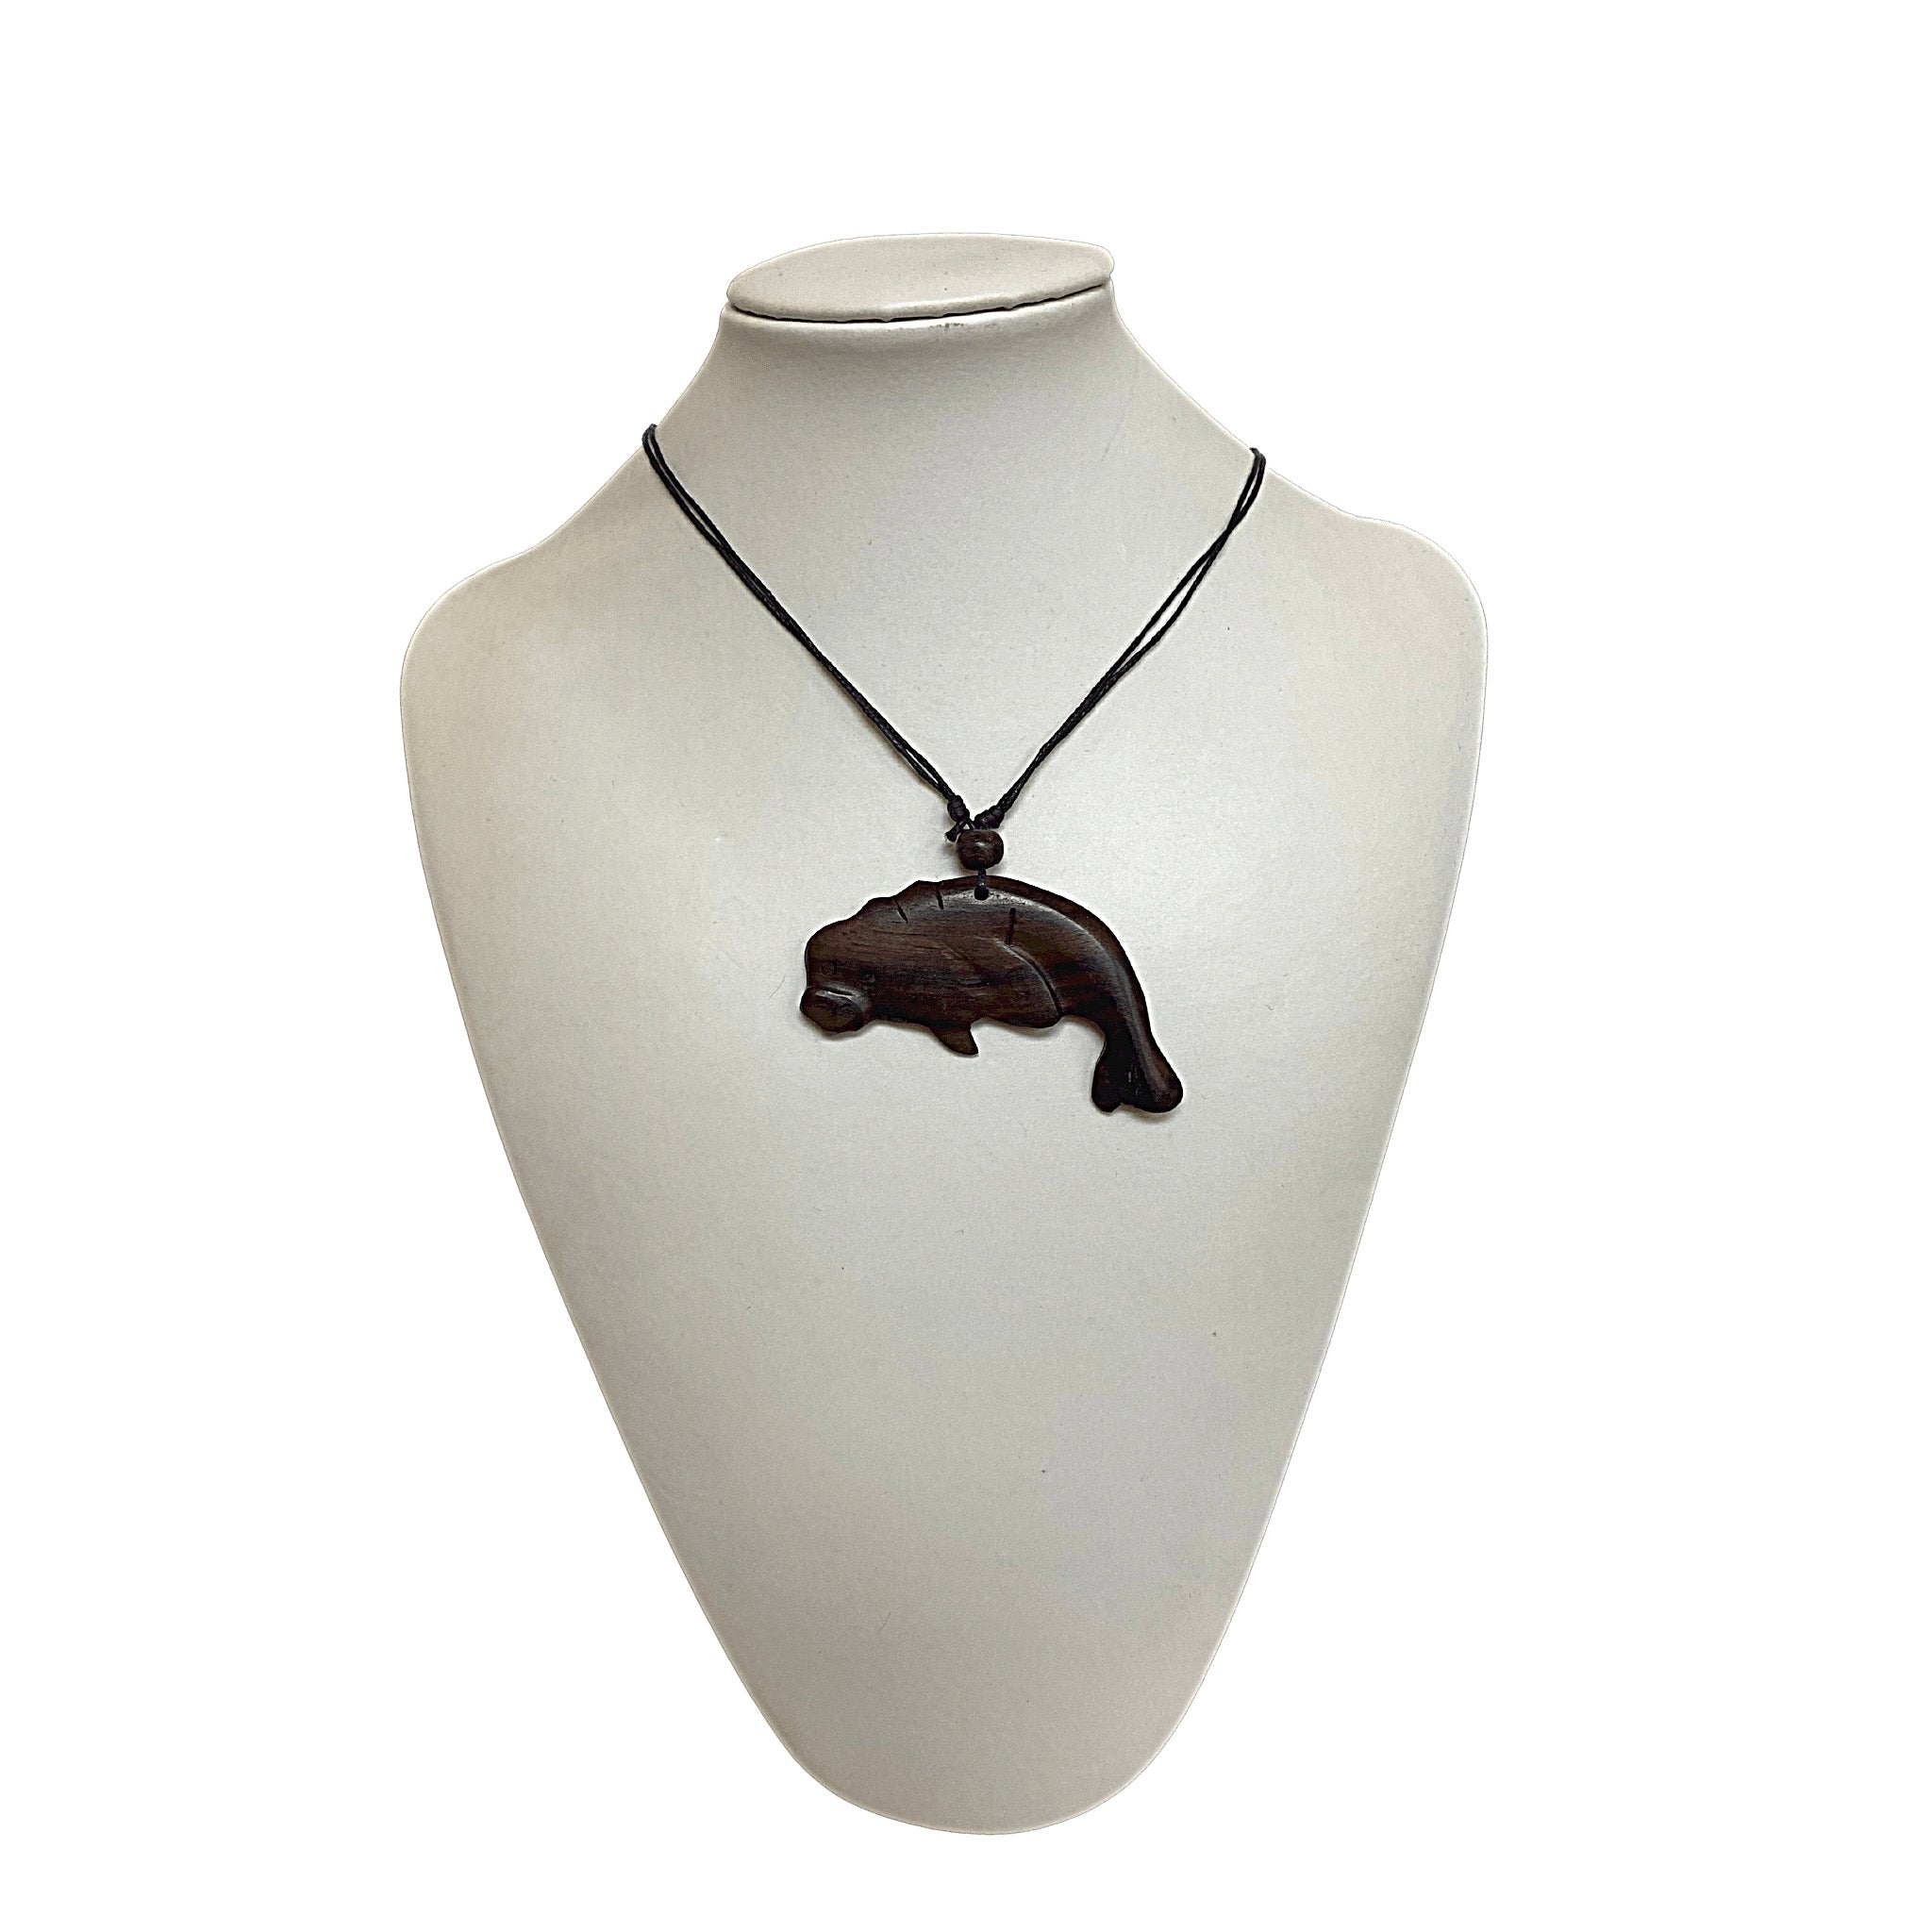 Sea Turtle Necklace hand carved Ironwood Sea Turtle pendant Wood Necklace Sea Animal Nautical Wood Jewelry One of a Kind Gift for Him Her - Tobmarc Home Decor & Gifts 